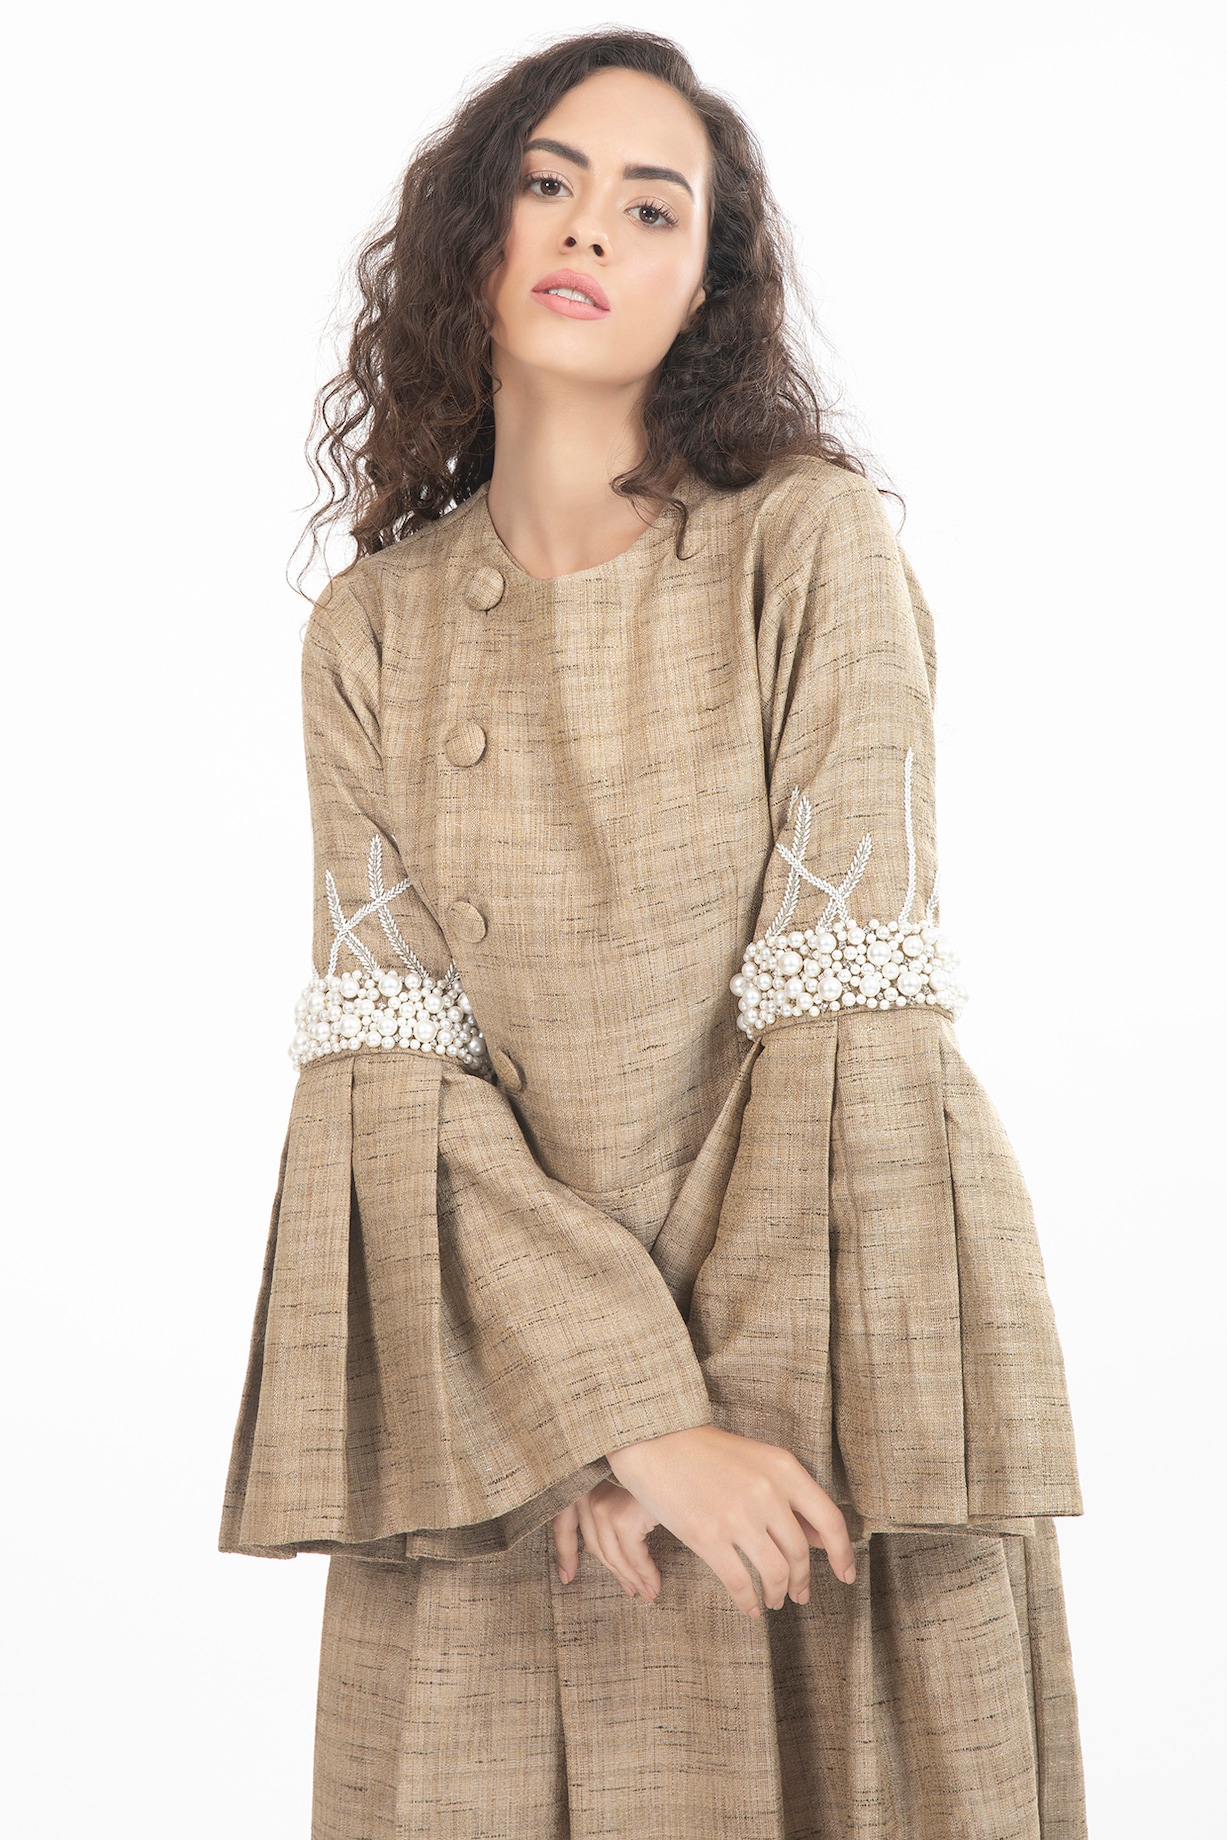 Macadamia Beige Jute Embellished THL Design Shop Pernia\'s Pop of at by Up 2024 House Dress